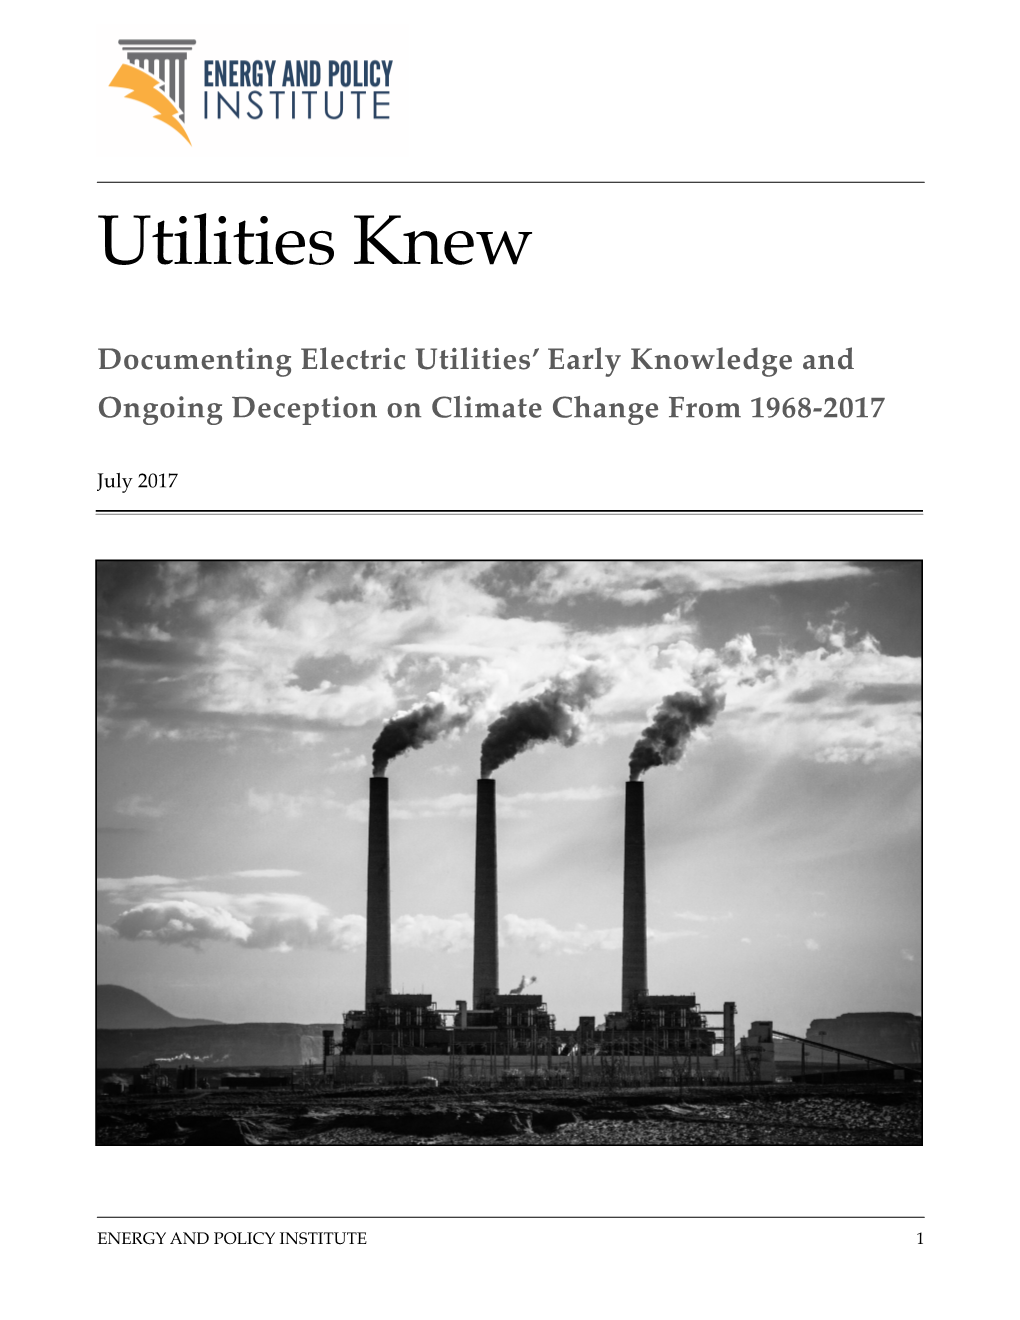 Utilities Knew/ Documenting Electric Utilities' Early Knowledge And